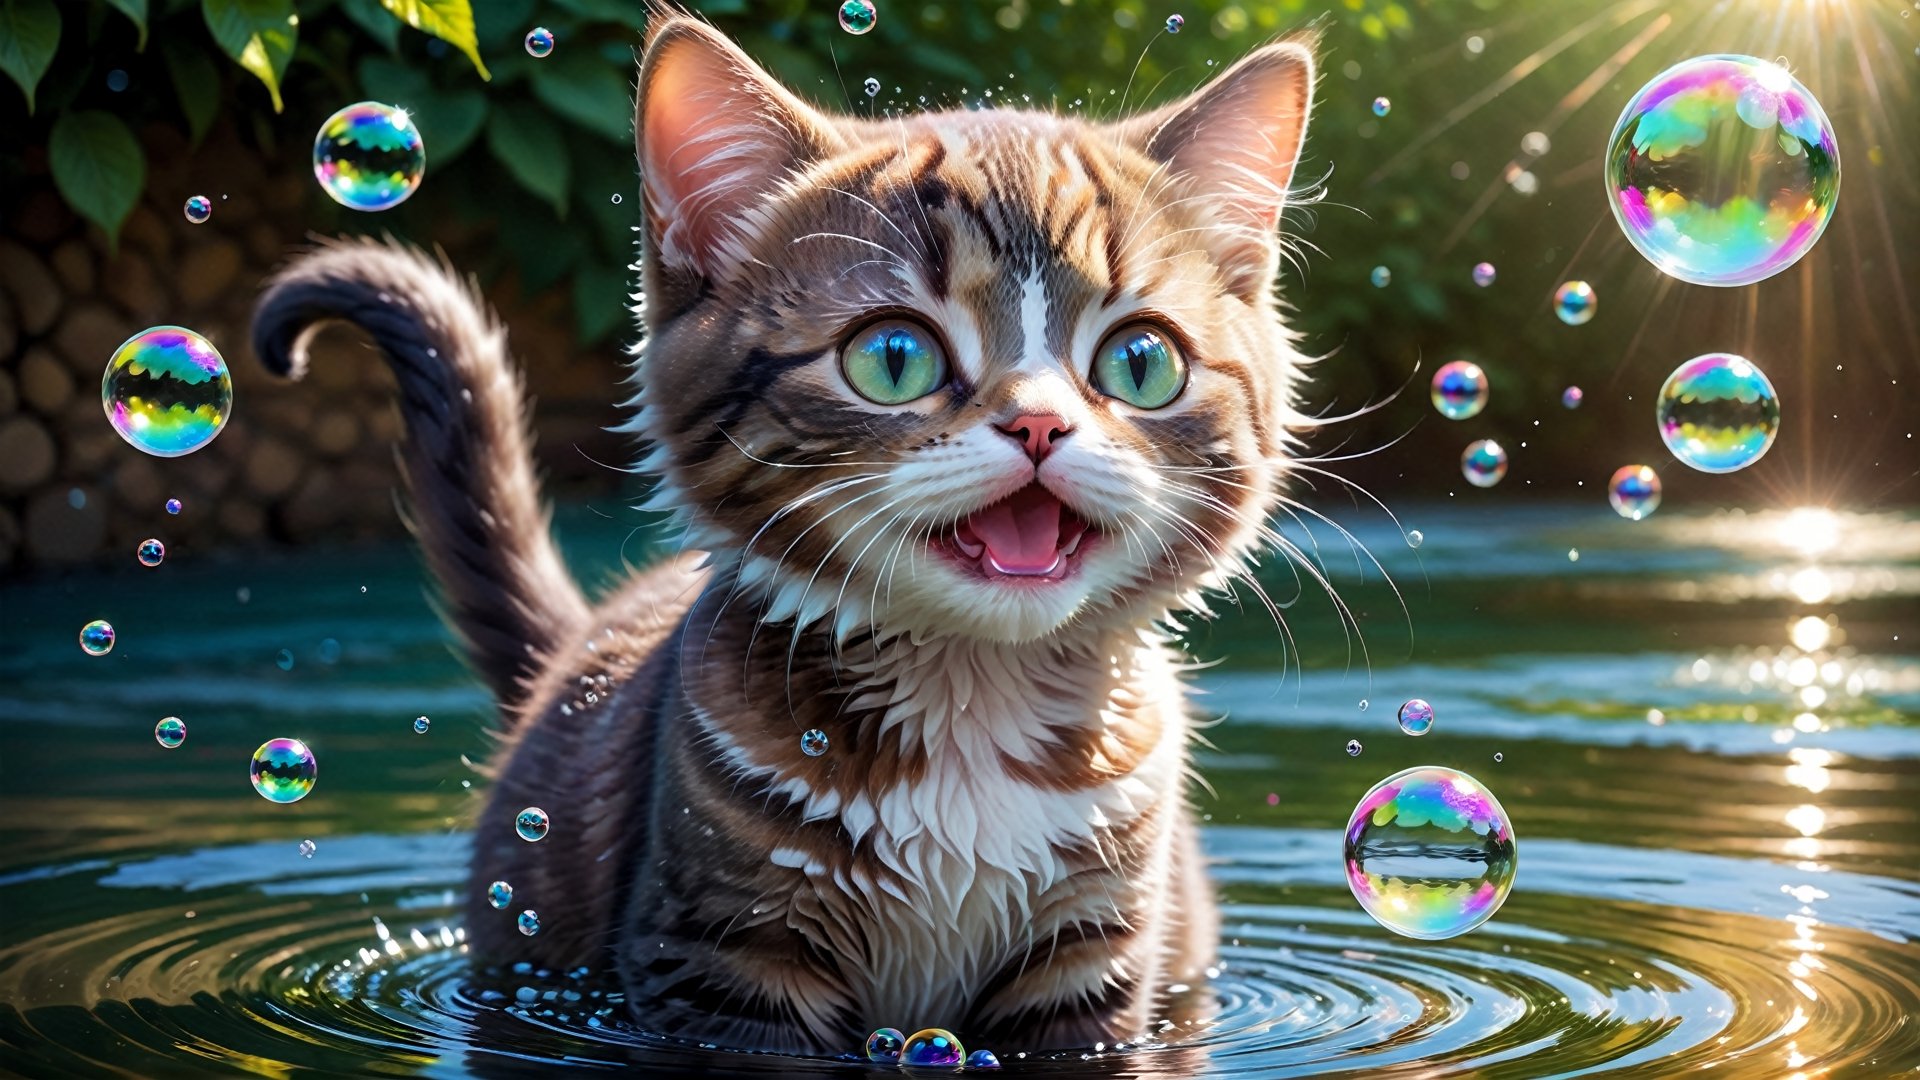 Envision an adorable and playful scene: a beautiful kitty joyfully interacting with glistening water bubbles. Capture the charm of this moment, focusing on the playful expressions of the kitty and the iridescence of the bubbles. Encourage artists to create a visually delightful composition that conveys the innocence and joy found in the interaction between a curious cat and the enchanting allure of water bubbles.